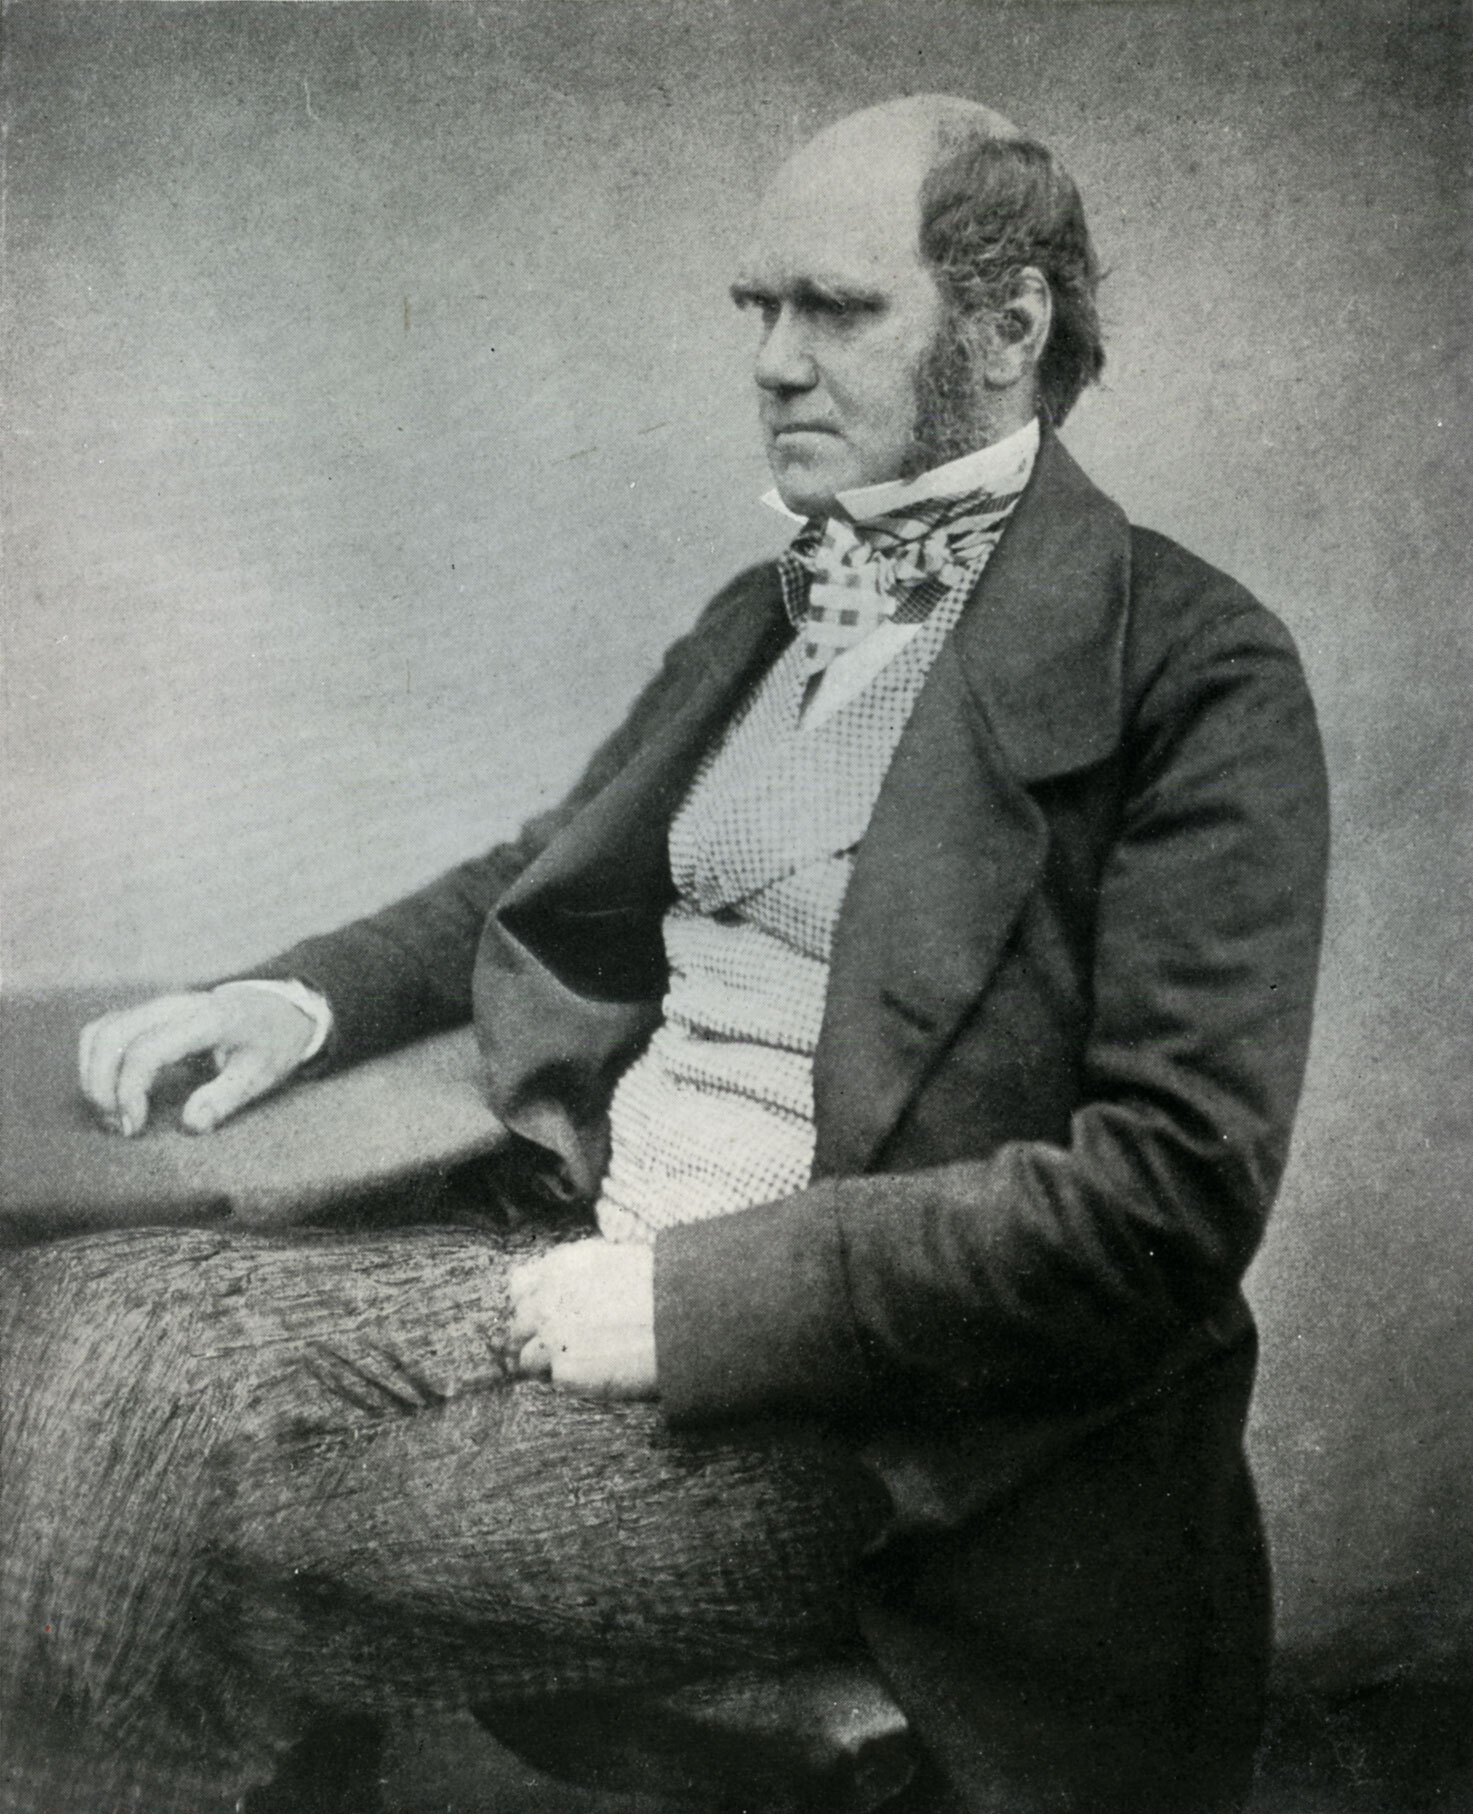 Reproduction of photograph "Charles Darwin" by Maull and Fox